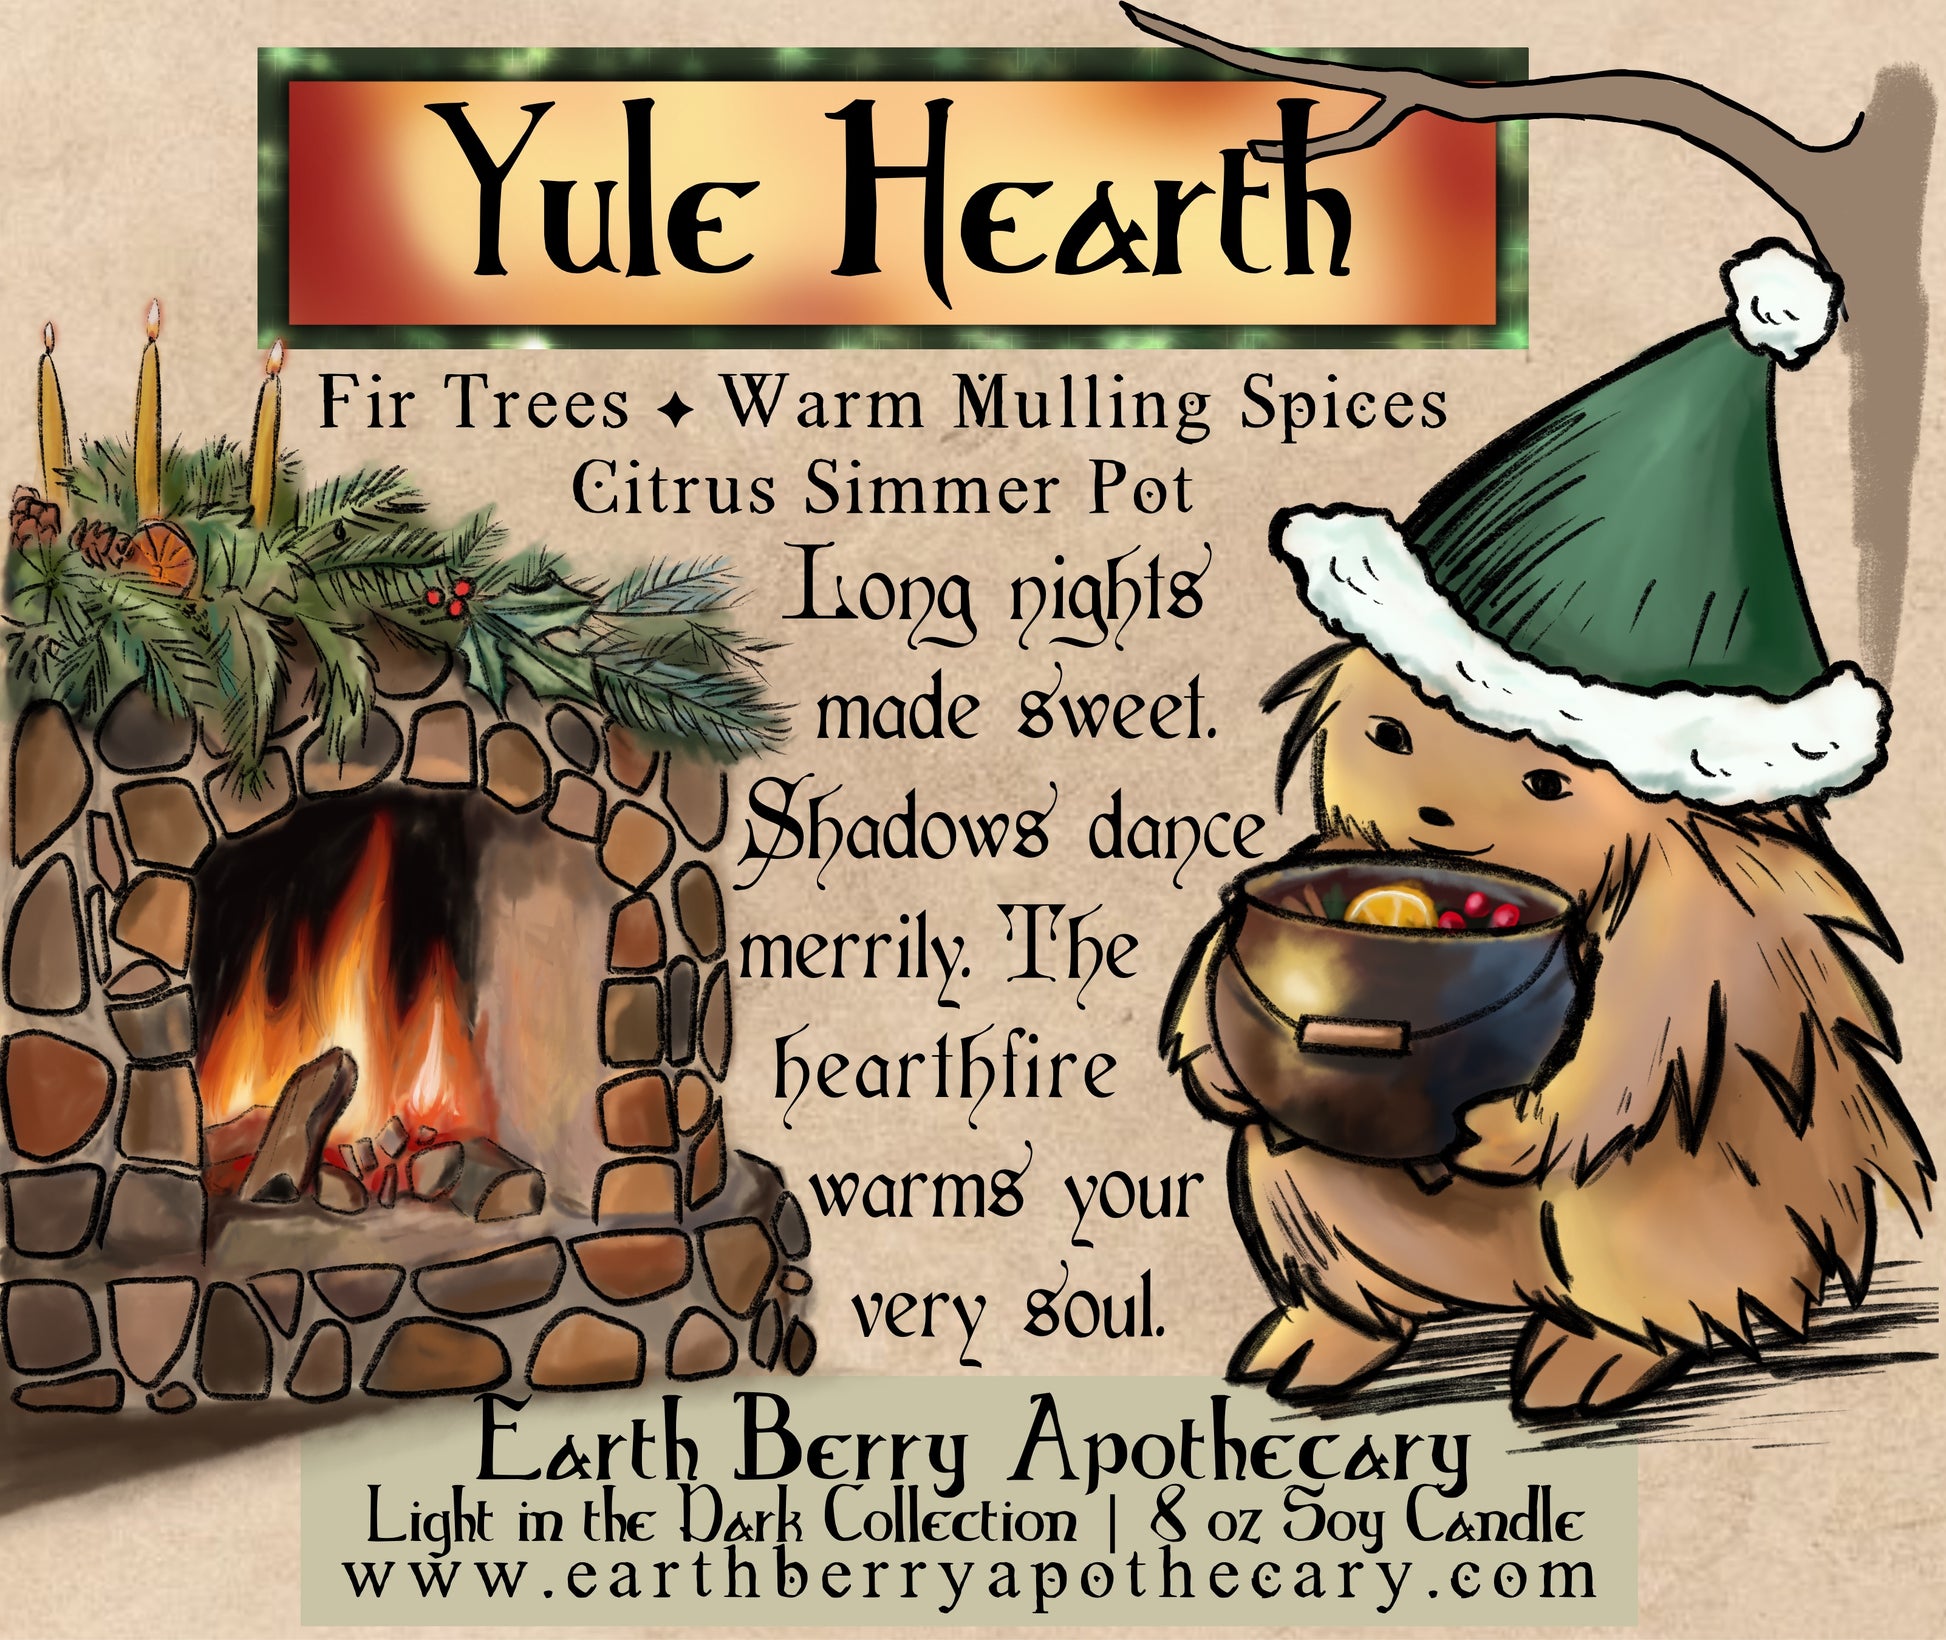 Yule hearth soy candle label with a hedge witch carrying a simmer pot to a fireplace decked out in evergreen boughs and three candlesticks